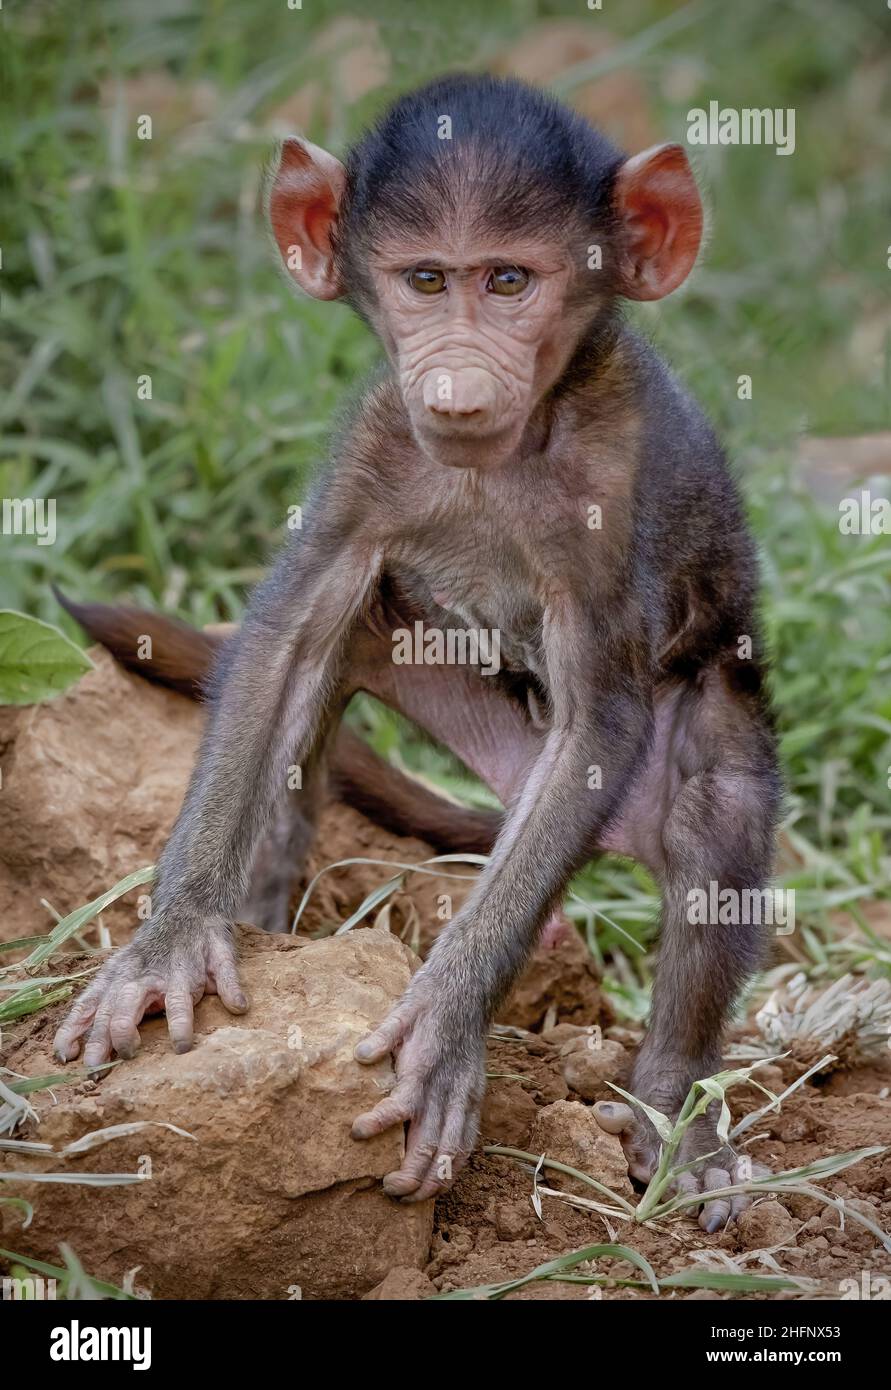 Baby olive baboon (Papio anubis) attempting to lift a rock with a rock in its mouth, Ngorongoro Crater, Tanzania, Africa Stock Photo